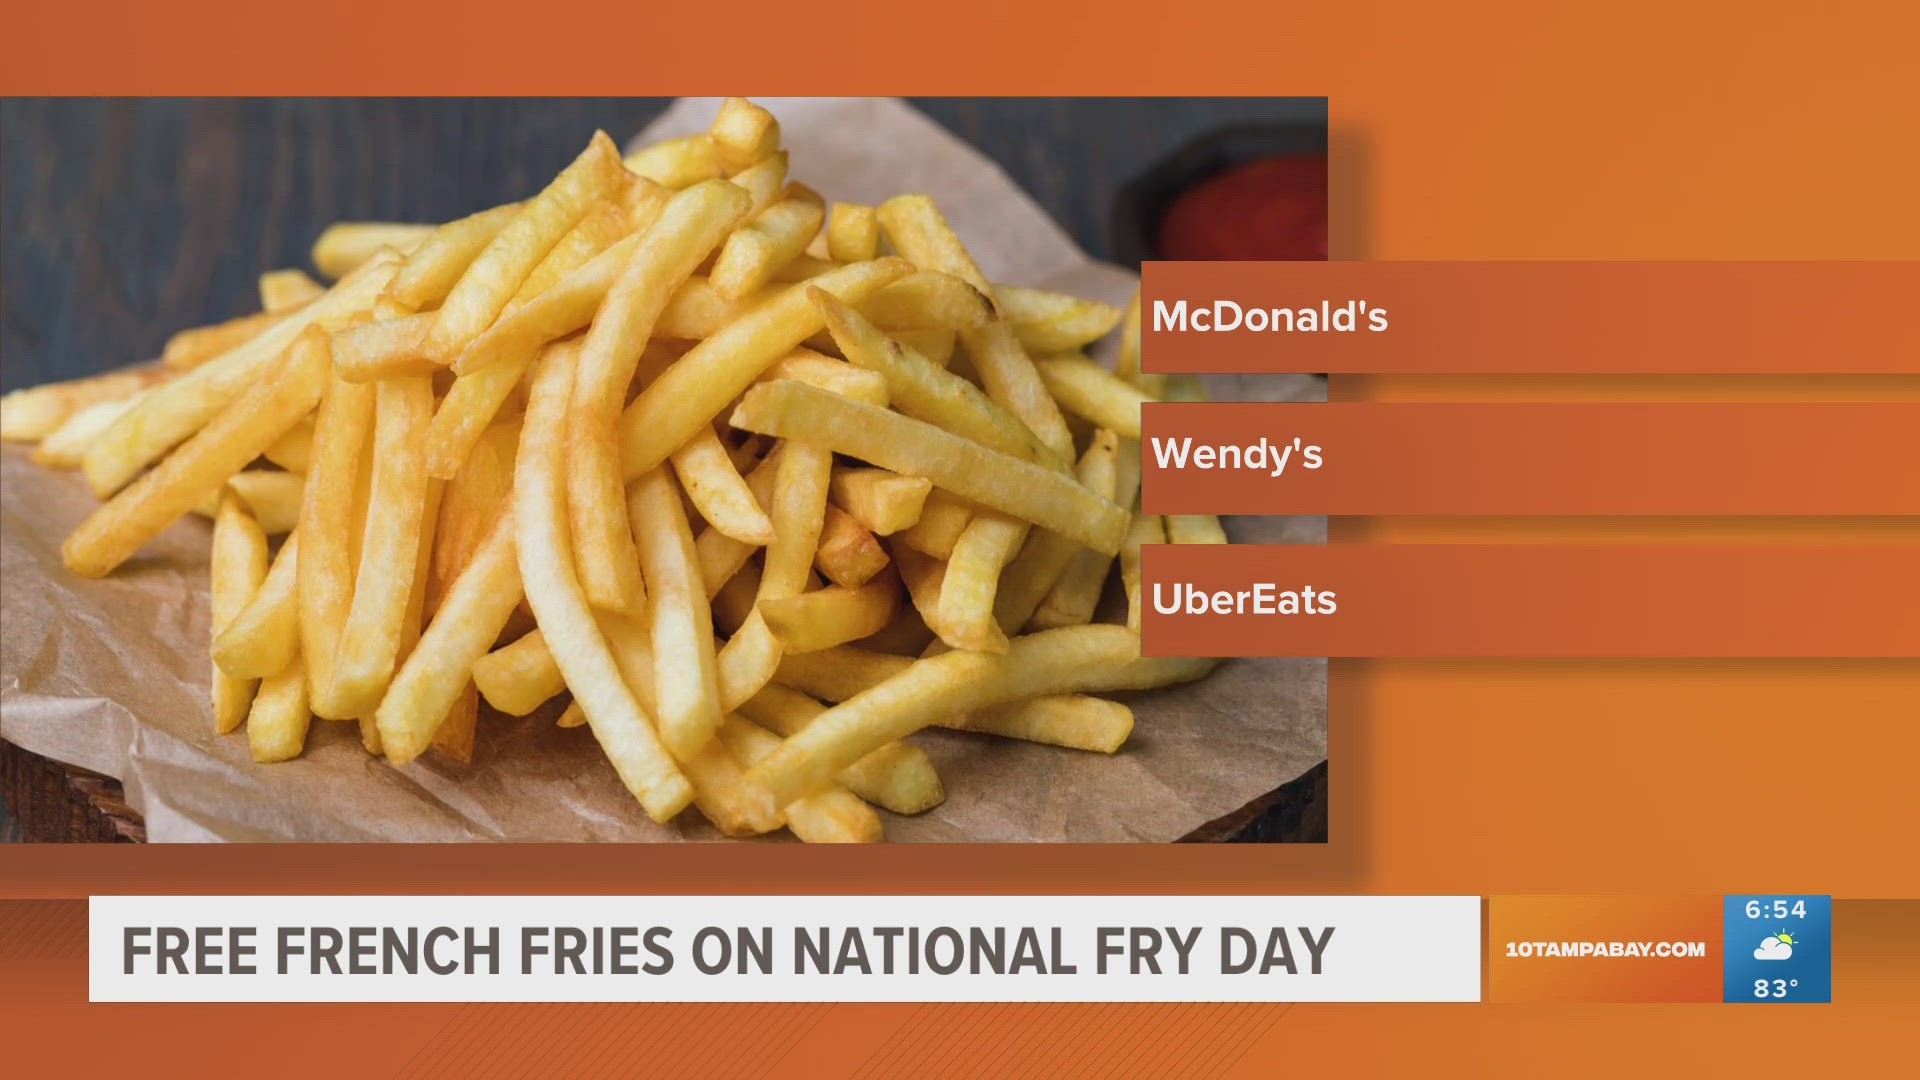 Fast Food Joints Offering Deals On National French Fry Day